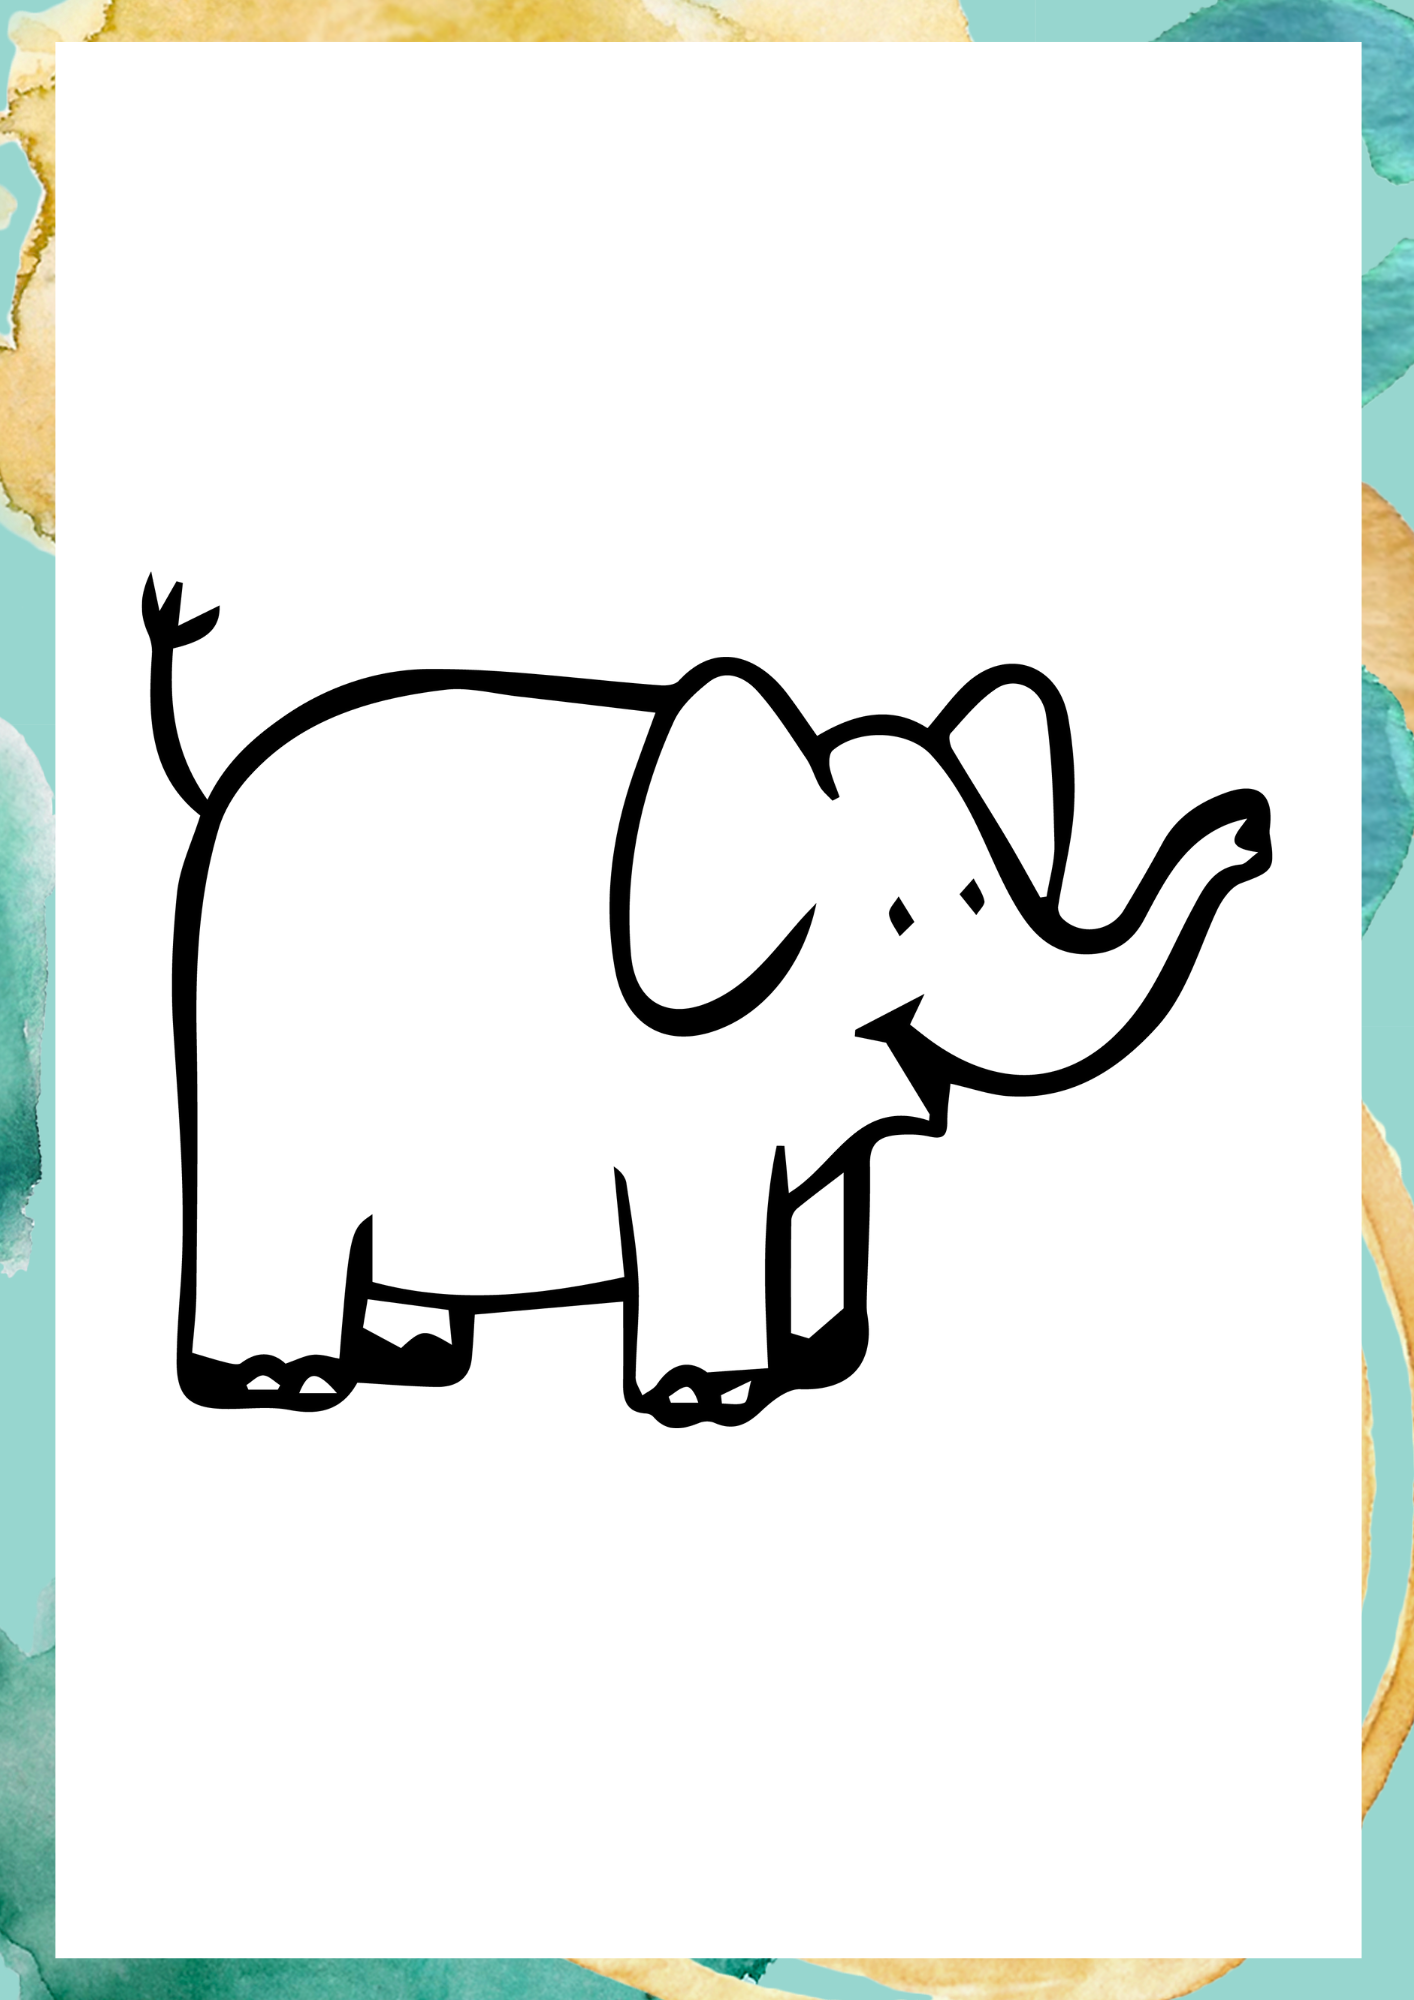 elephant coloring page, animal coloring page, coloring page, coloring page for toddlers, Coloring Page, coloring sheet, happy color, colouring, free coloring pages, coloring pages for kids, printable coloring pages, cute coloring pages, colouring pages, colouring to print,free printable coloring pages, free coloring pages for kids, easy coloring pages, coloring sheets